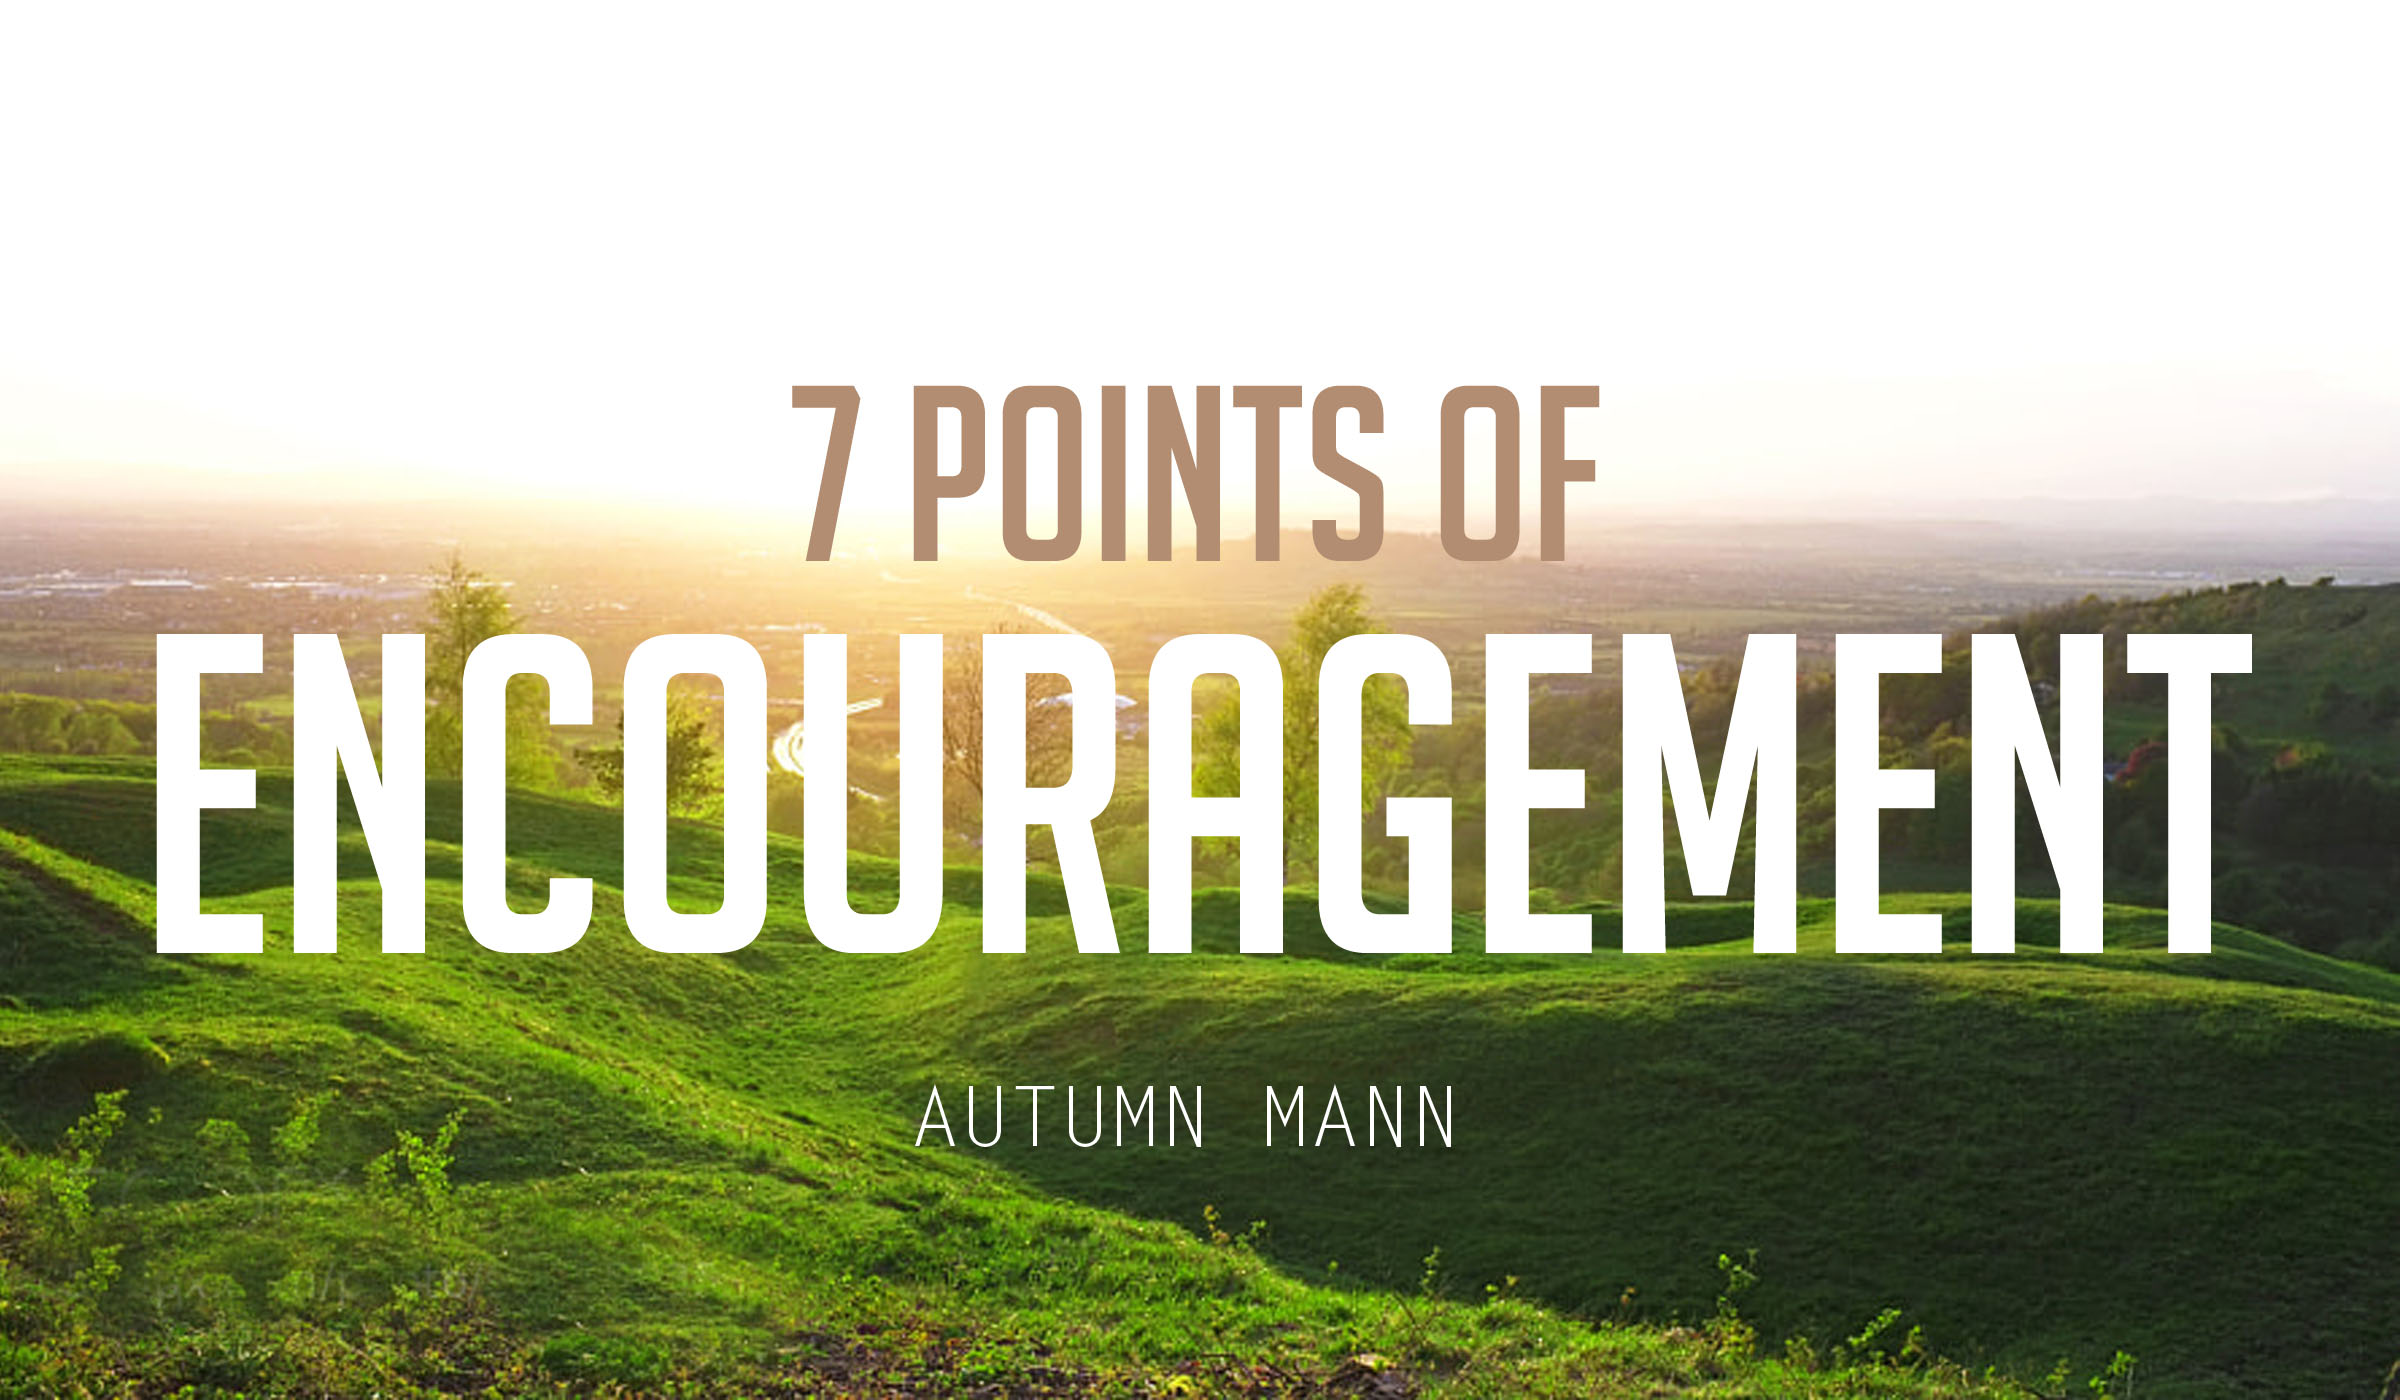 7 Points of Encouragement